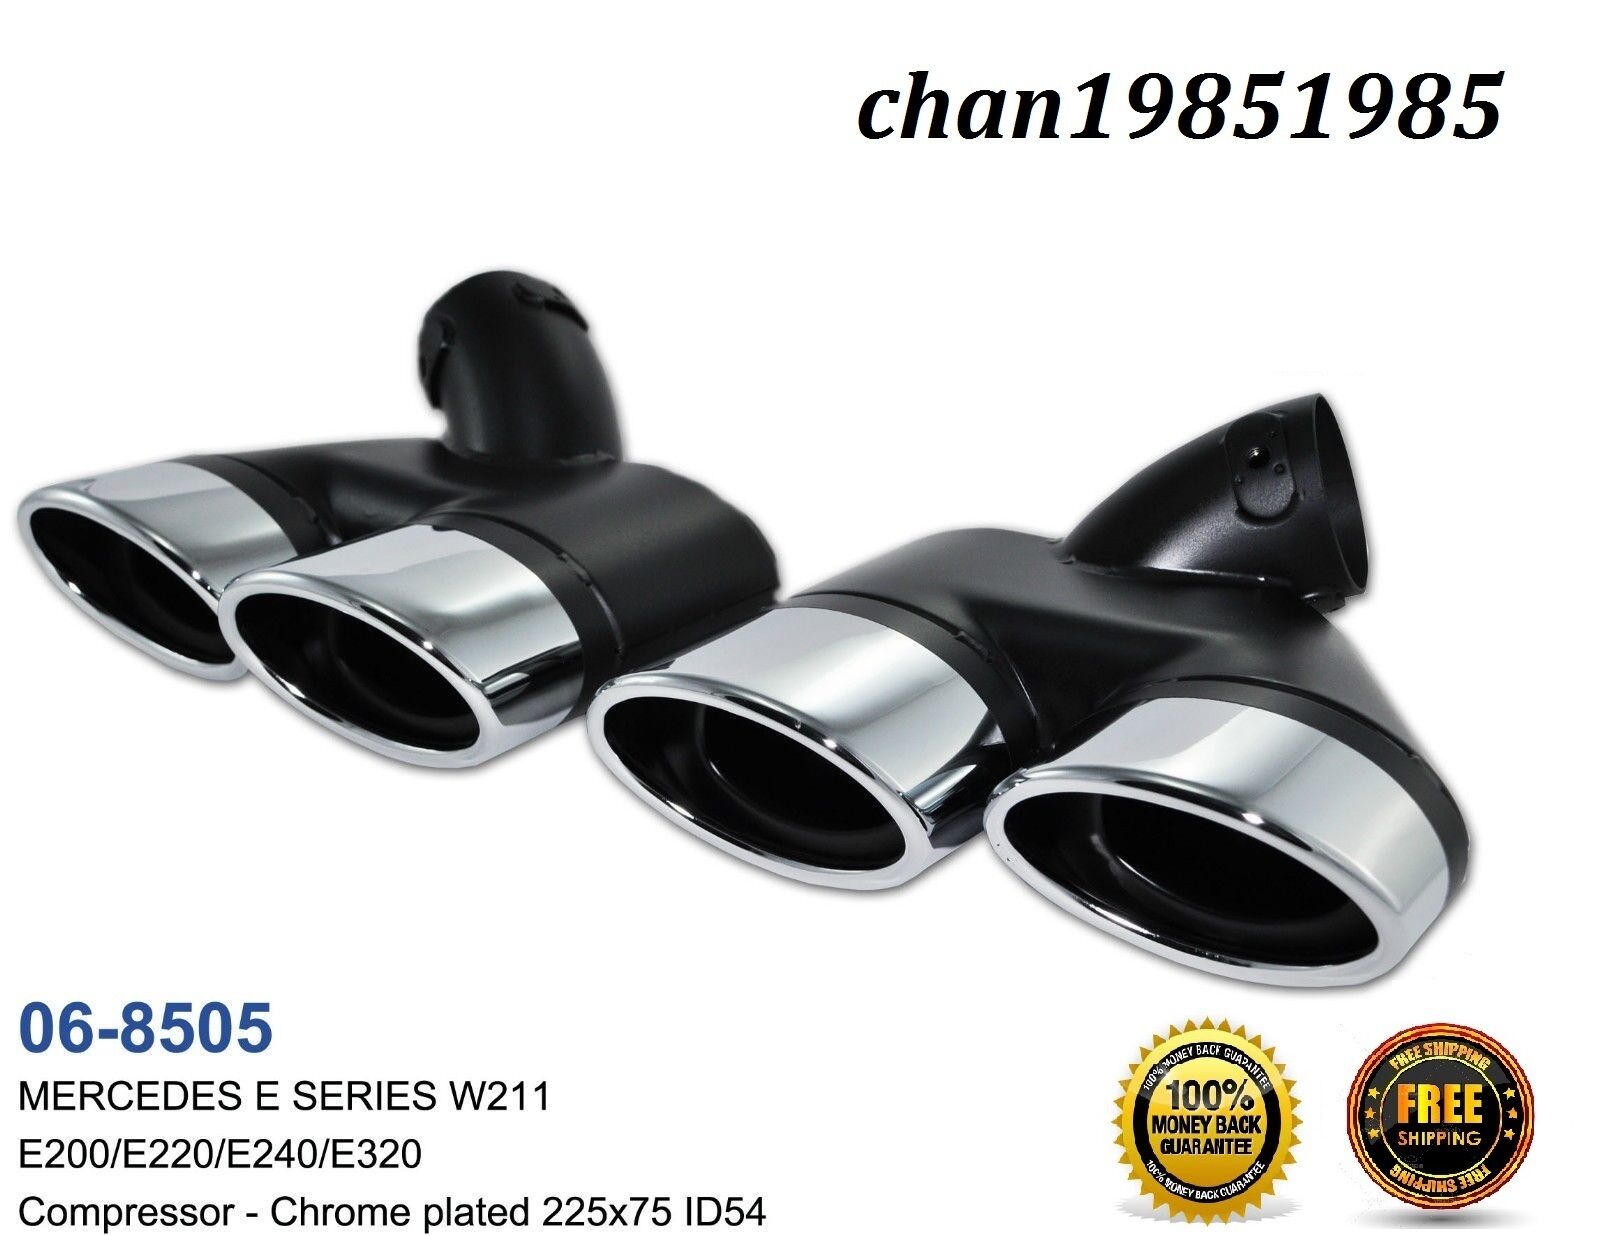 W211 Exhaust Tips Pipe Dual Tip Muffler For 2002-2007 Mercedes-benz E320 350 500